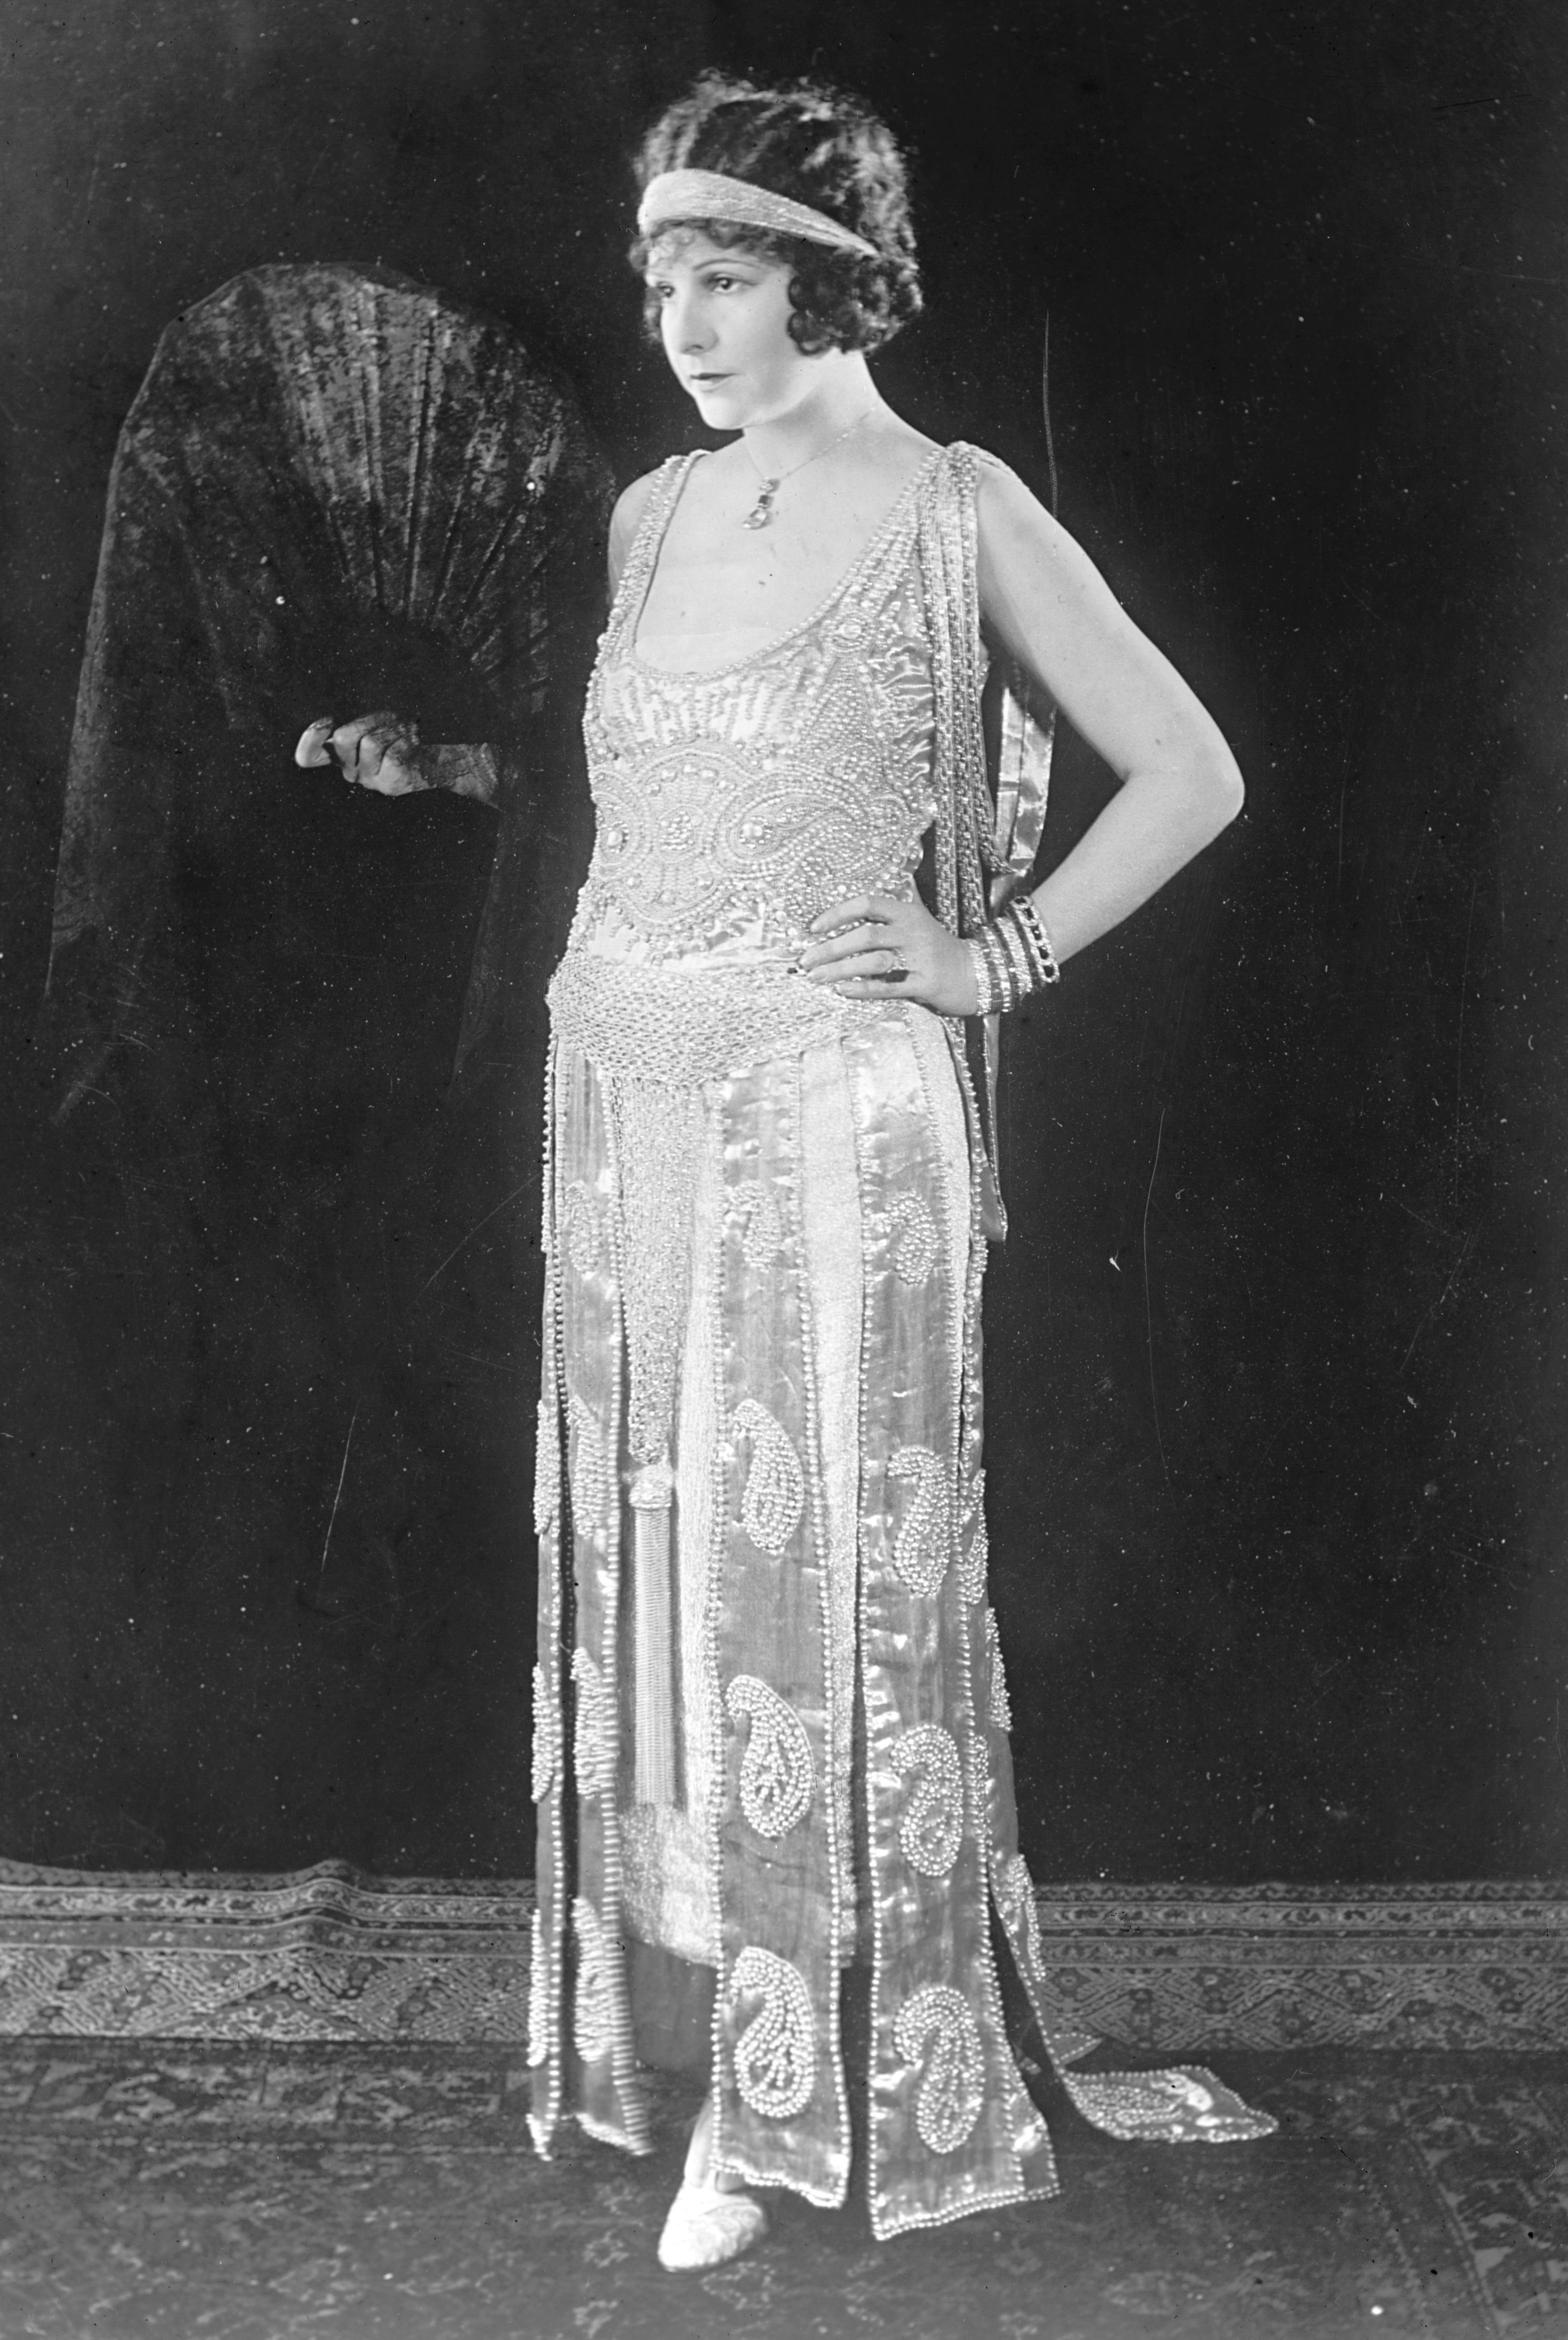 The Flappers In The 1920s